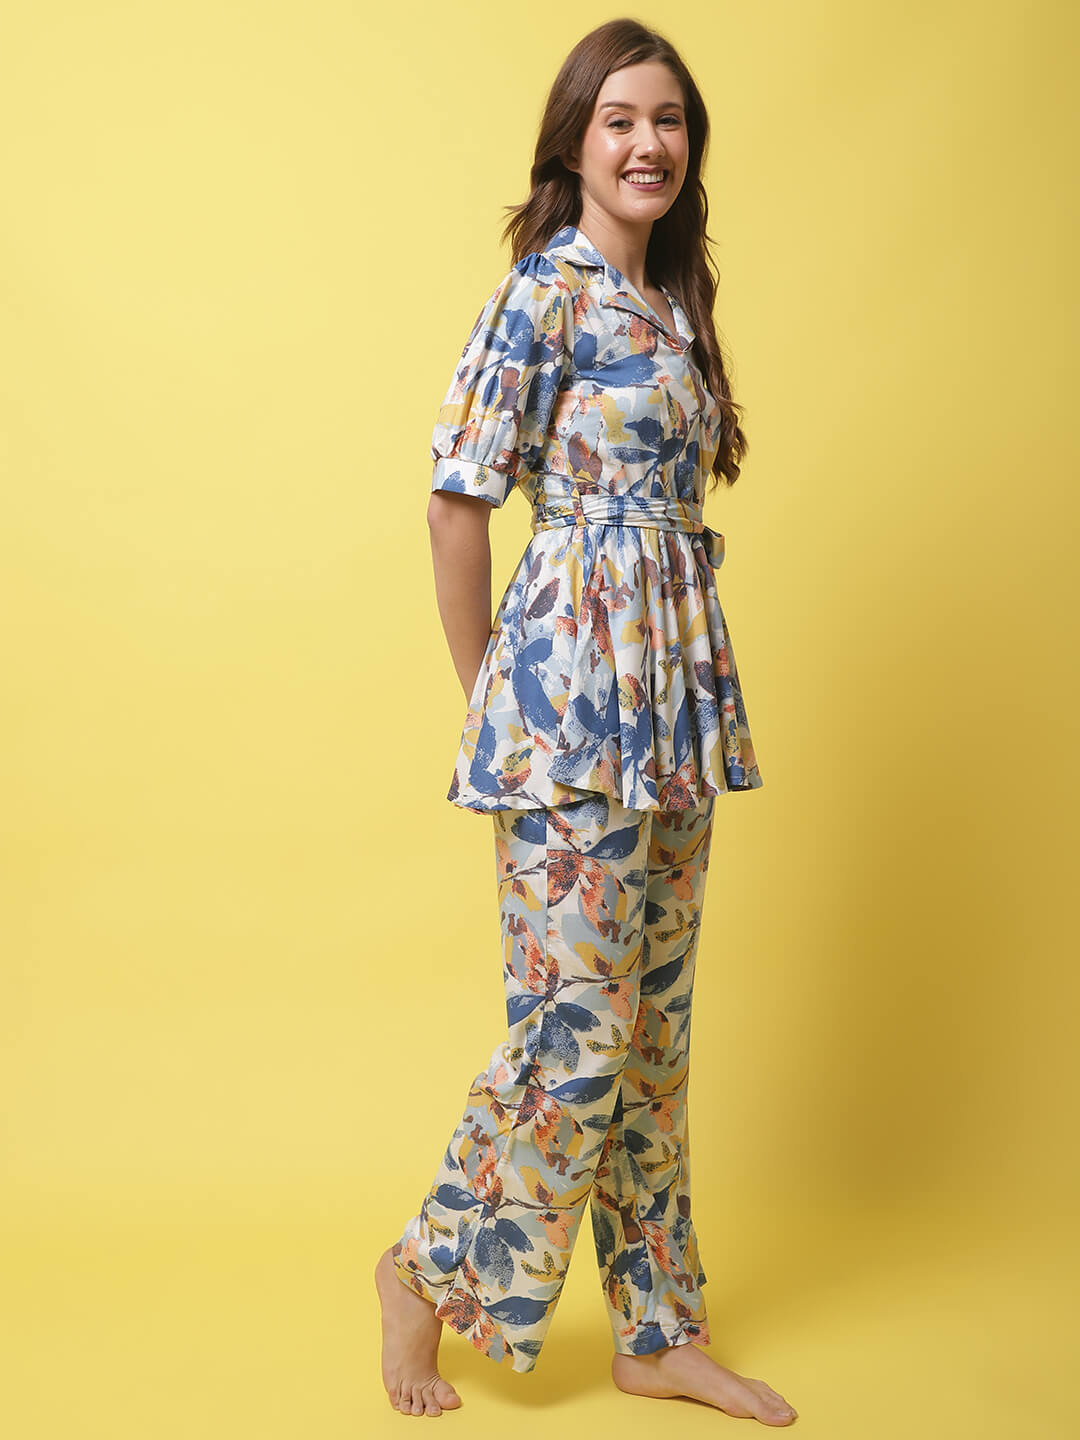 Blue Color Floral Printed Viscose Rayon Nightsuit For Women Claura Designs Pvt. Ltd. Nightsuit blue, Floral, Nightsuit, Rayon, Short Sleeves, Sleepwear